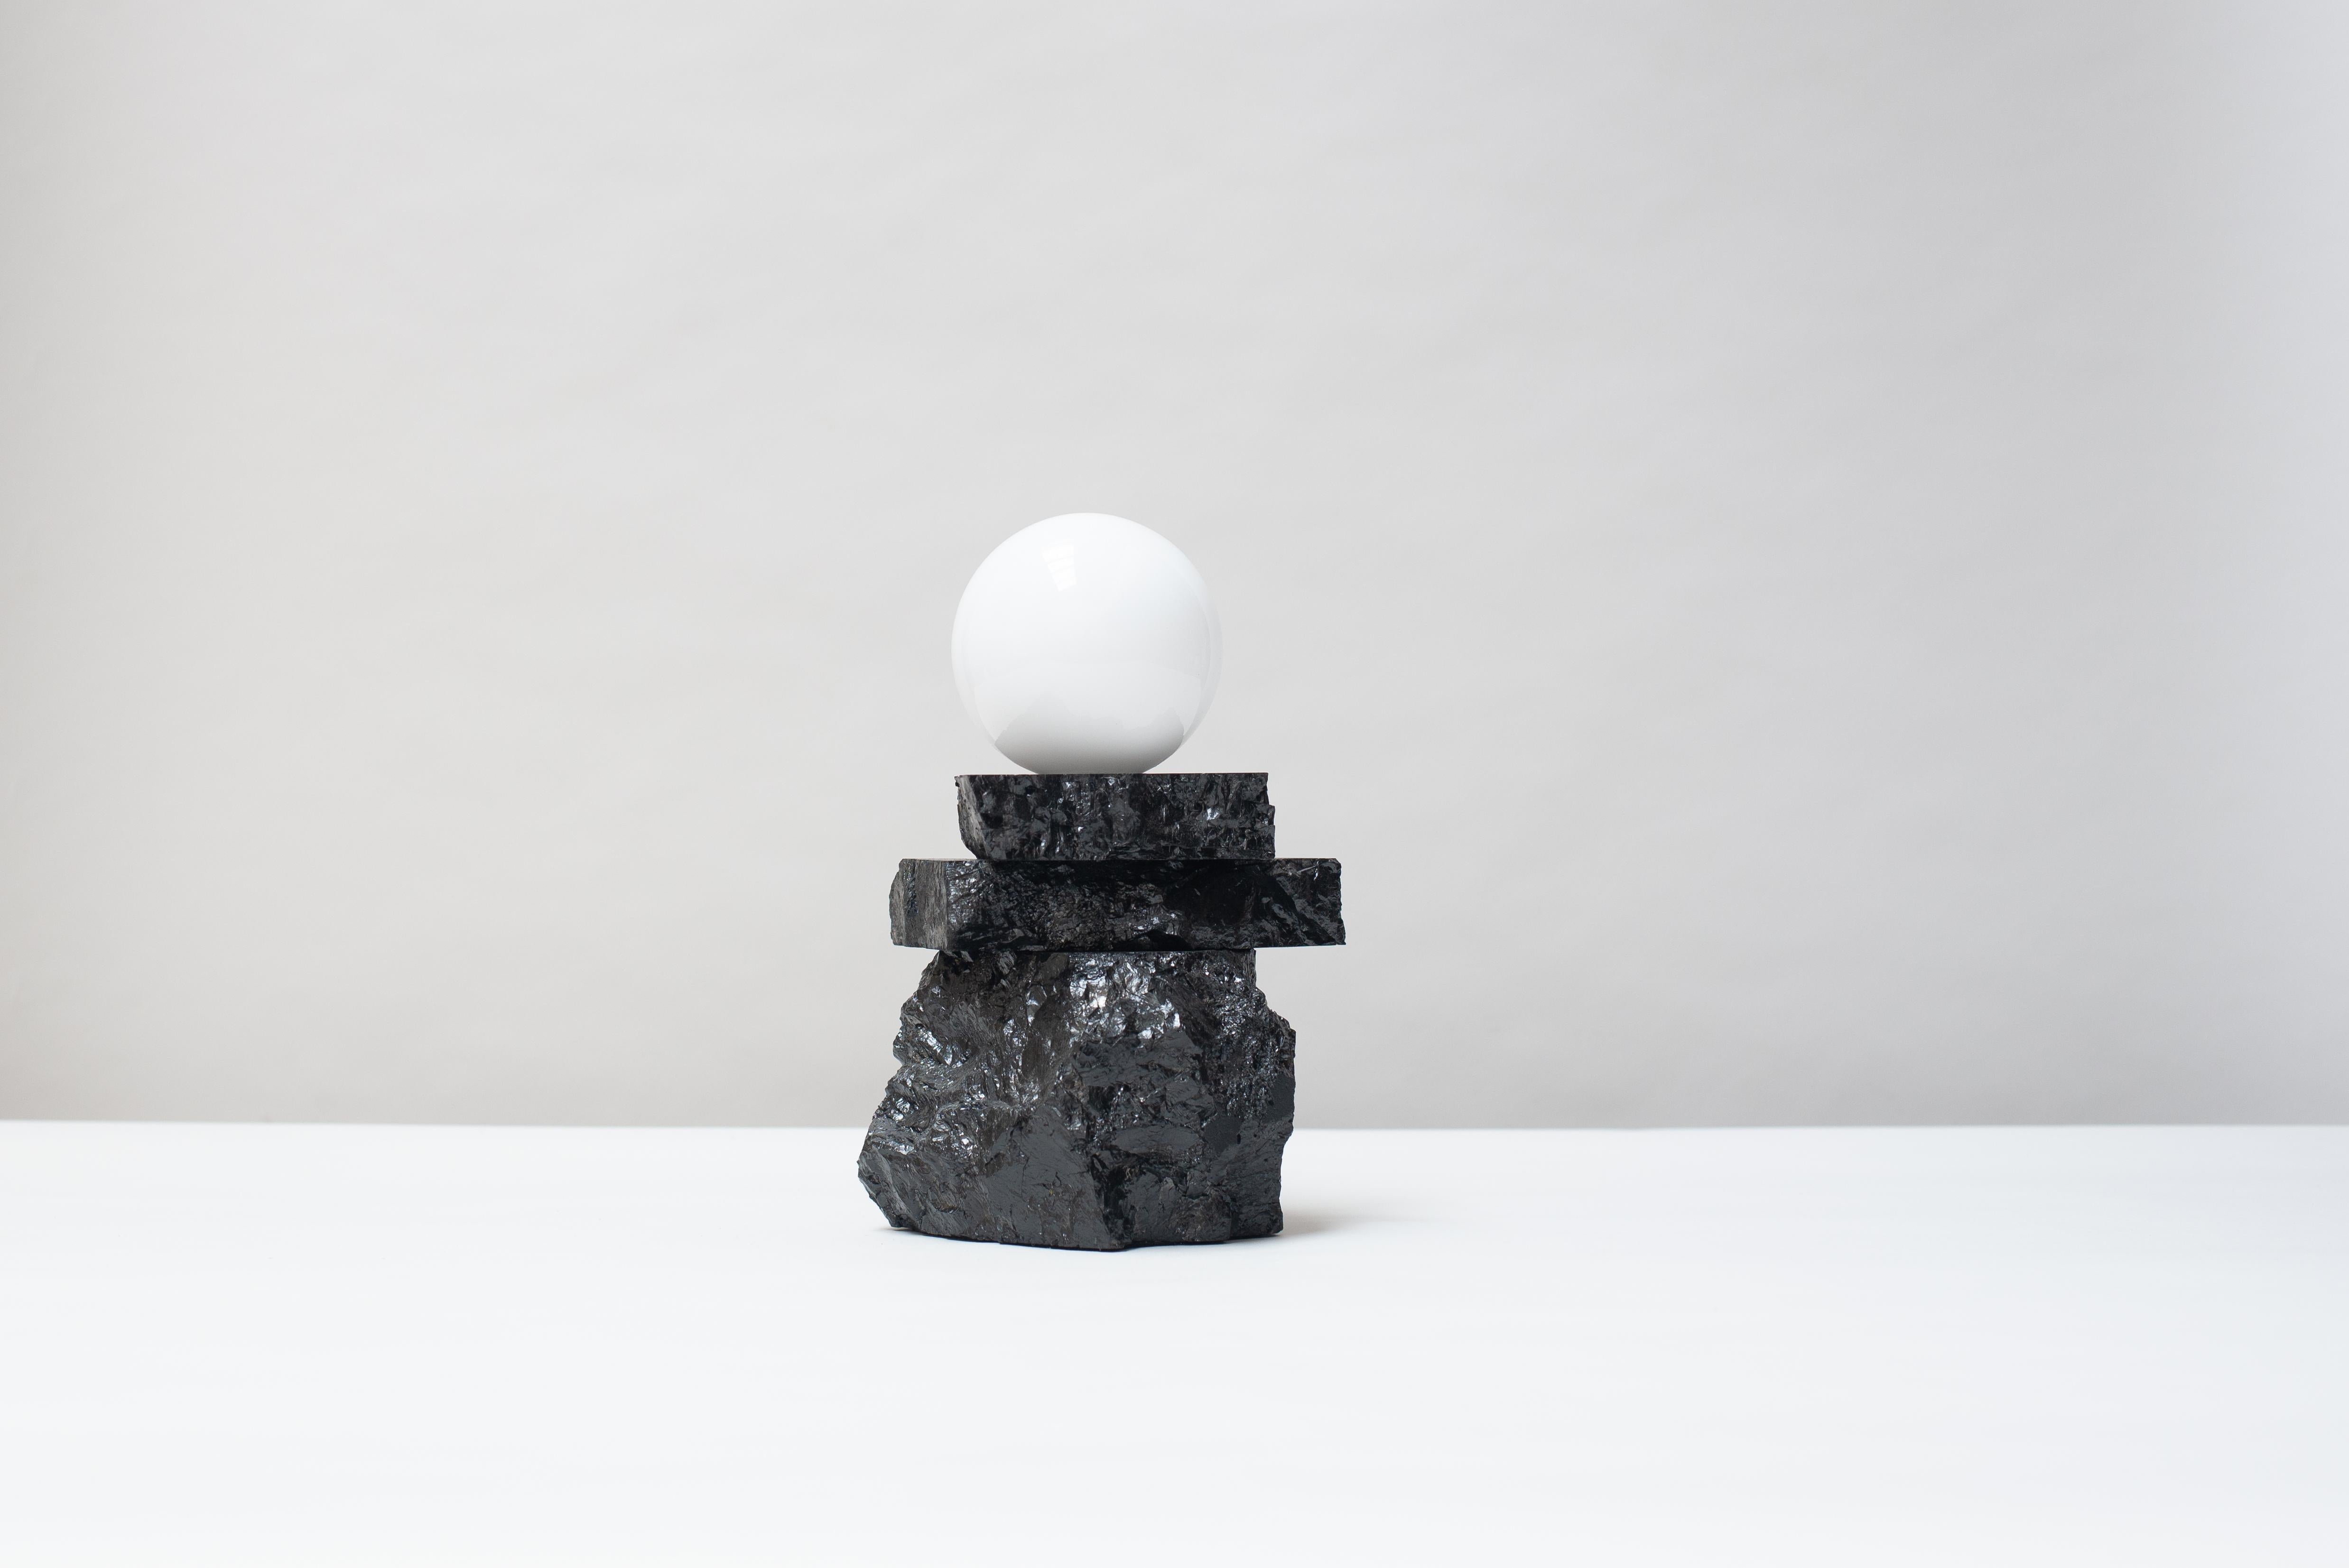 Table light 320 by Jesper Eriksson
Dimensions: D20 x H25 cm 
Materials: Anthracite coal, opal glass
Weight: 5 kg

All our lamps can be wired according to each country. If sold to the USA it will be wired for the USA for instance.

Jesper